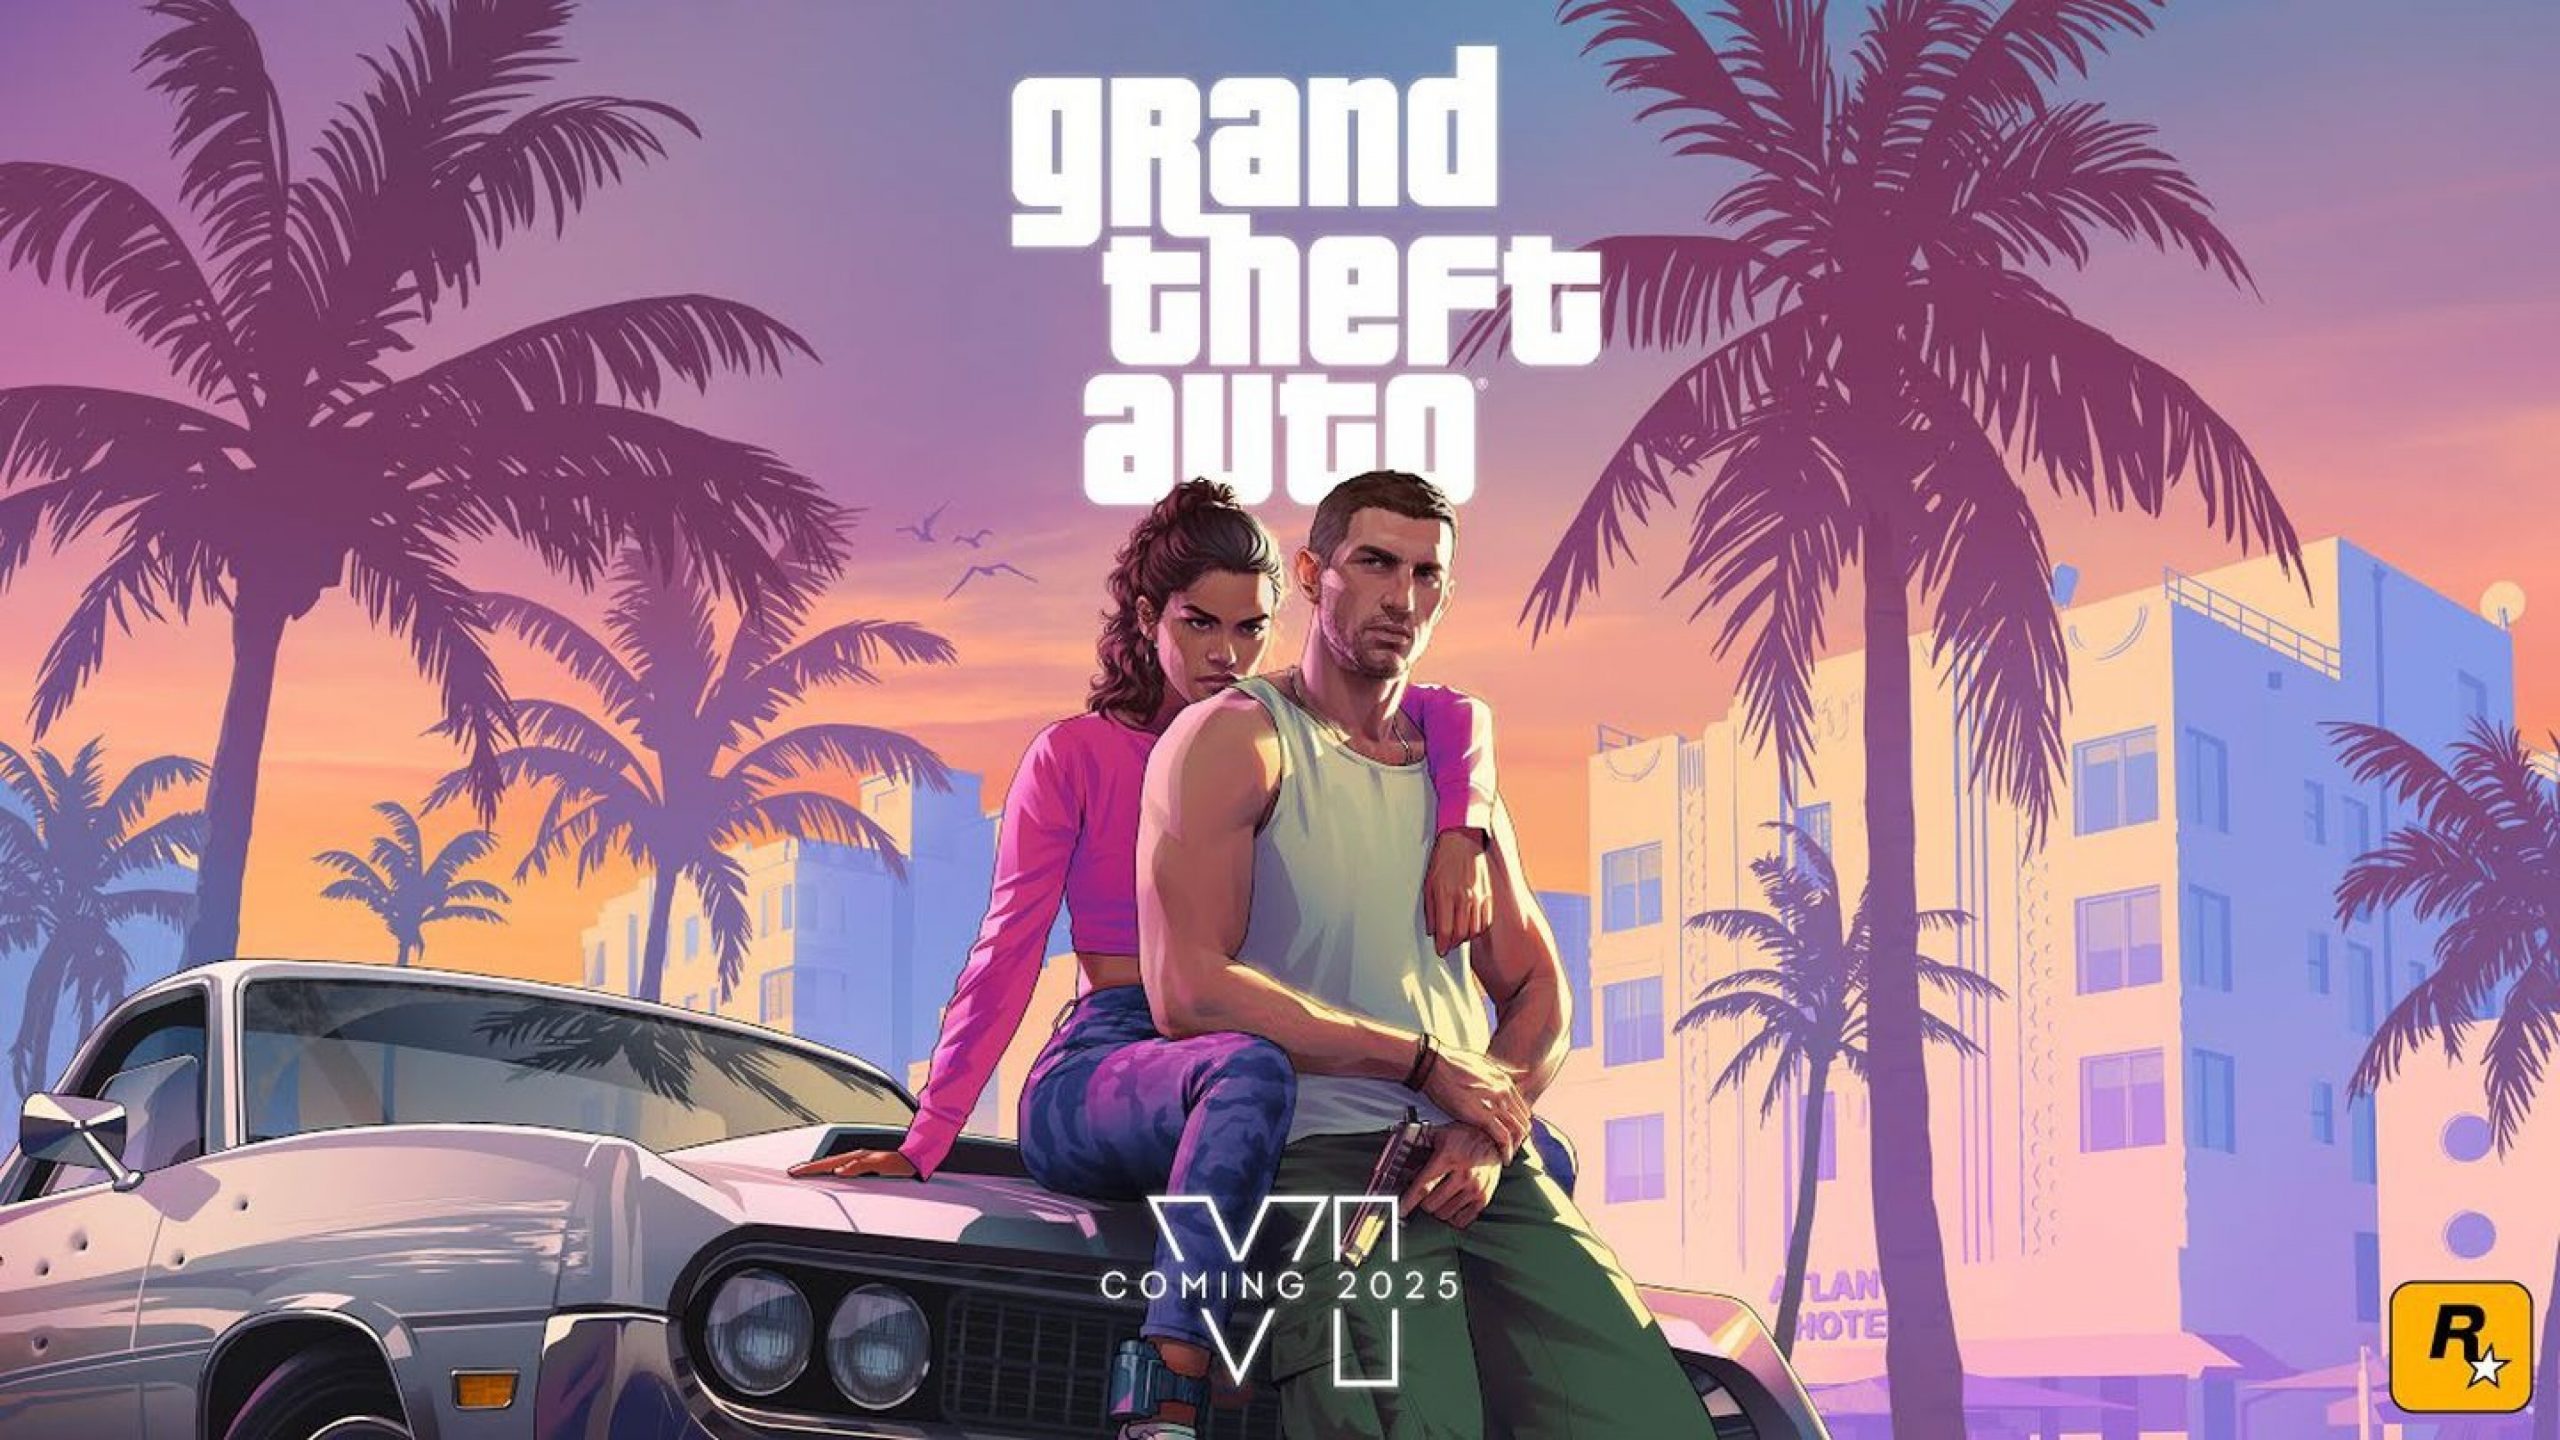 Fast Cars, Heists, and Vice City Vibes: GTA VI's First Look!